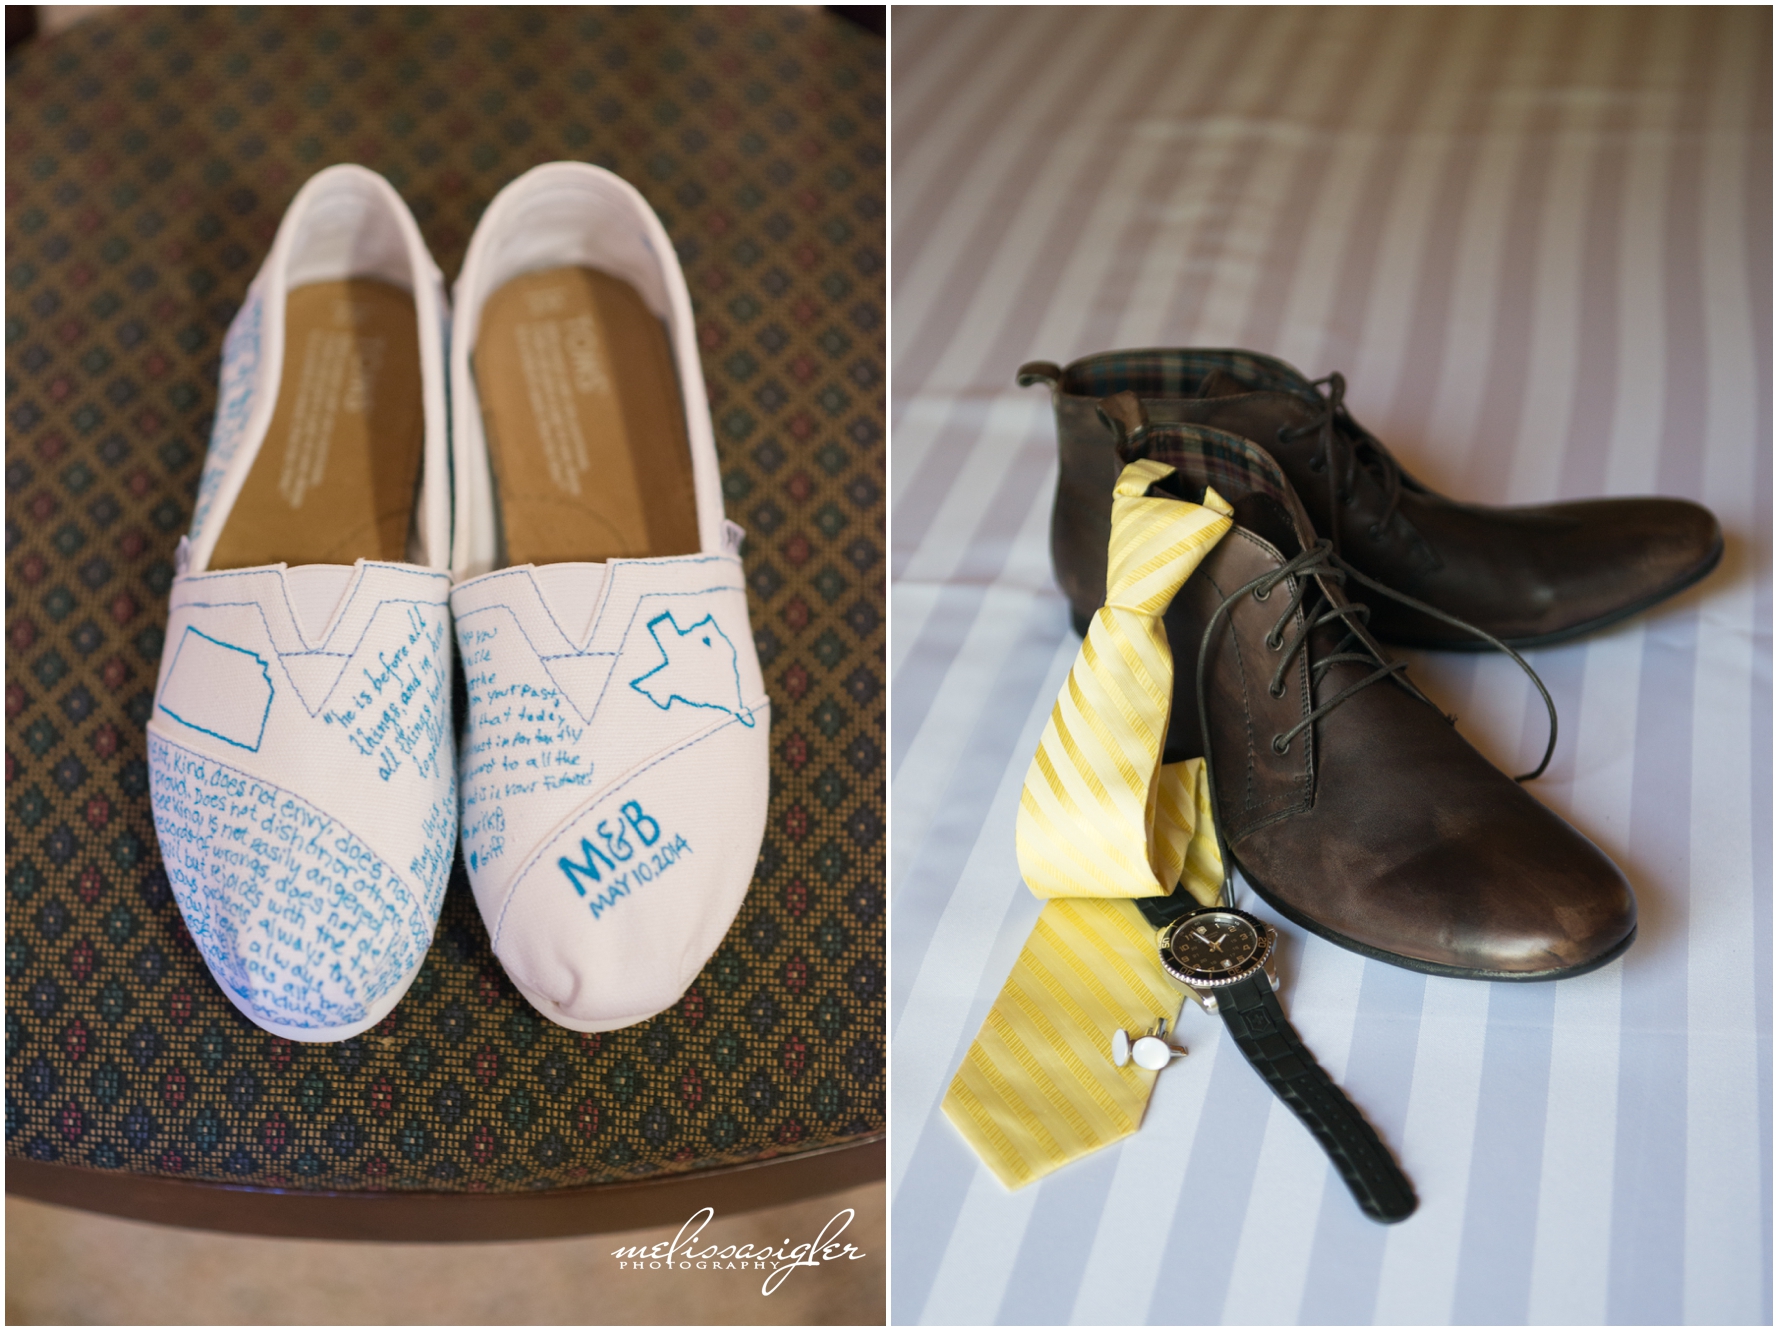 Bridal Toms and Groom's boots by Lawrence Kansas wedding photographer Melissa Sigler